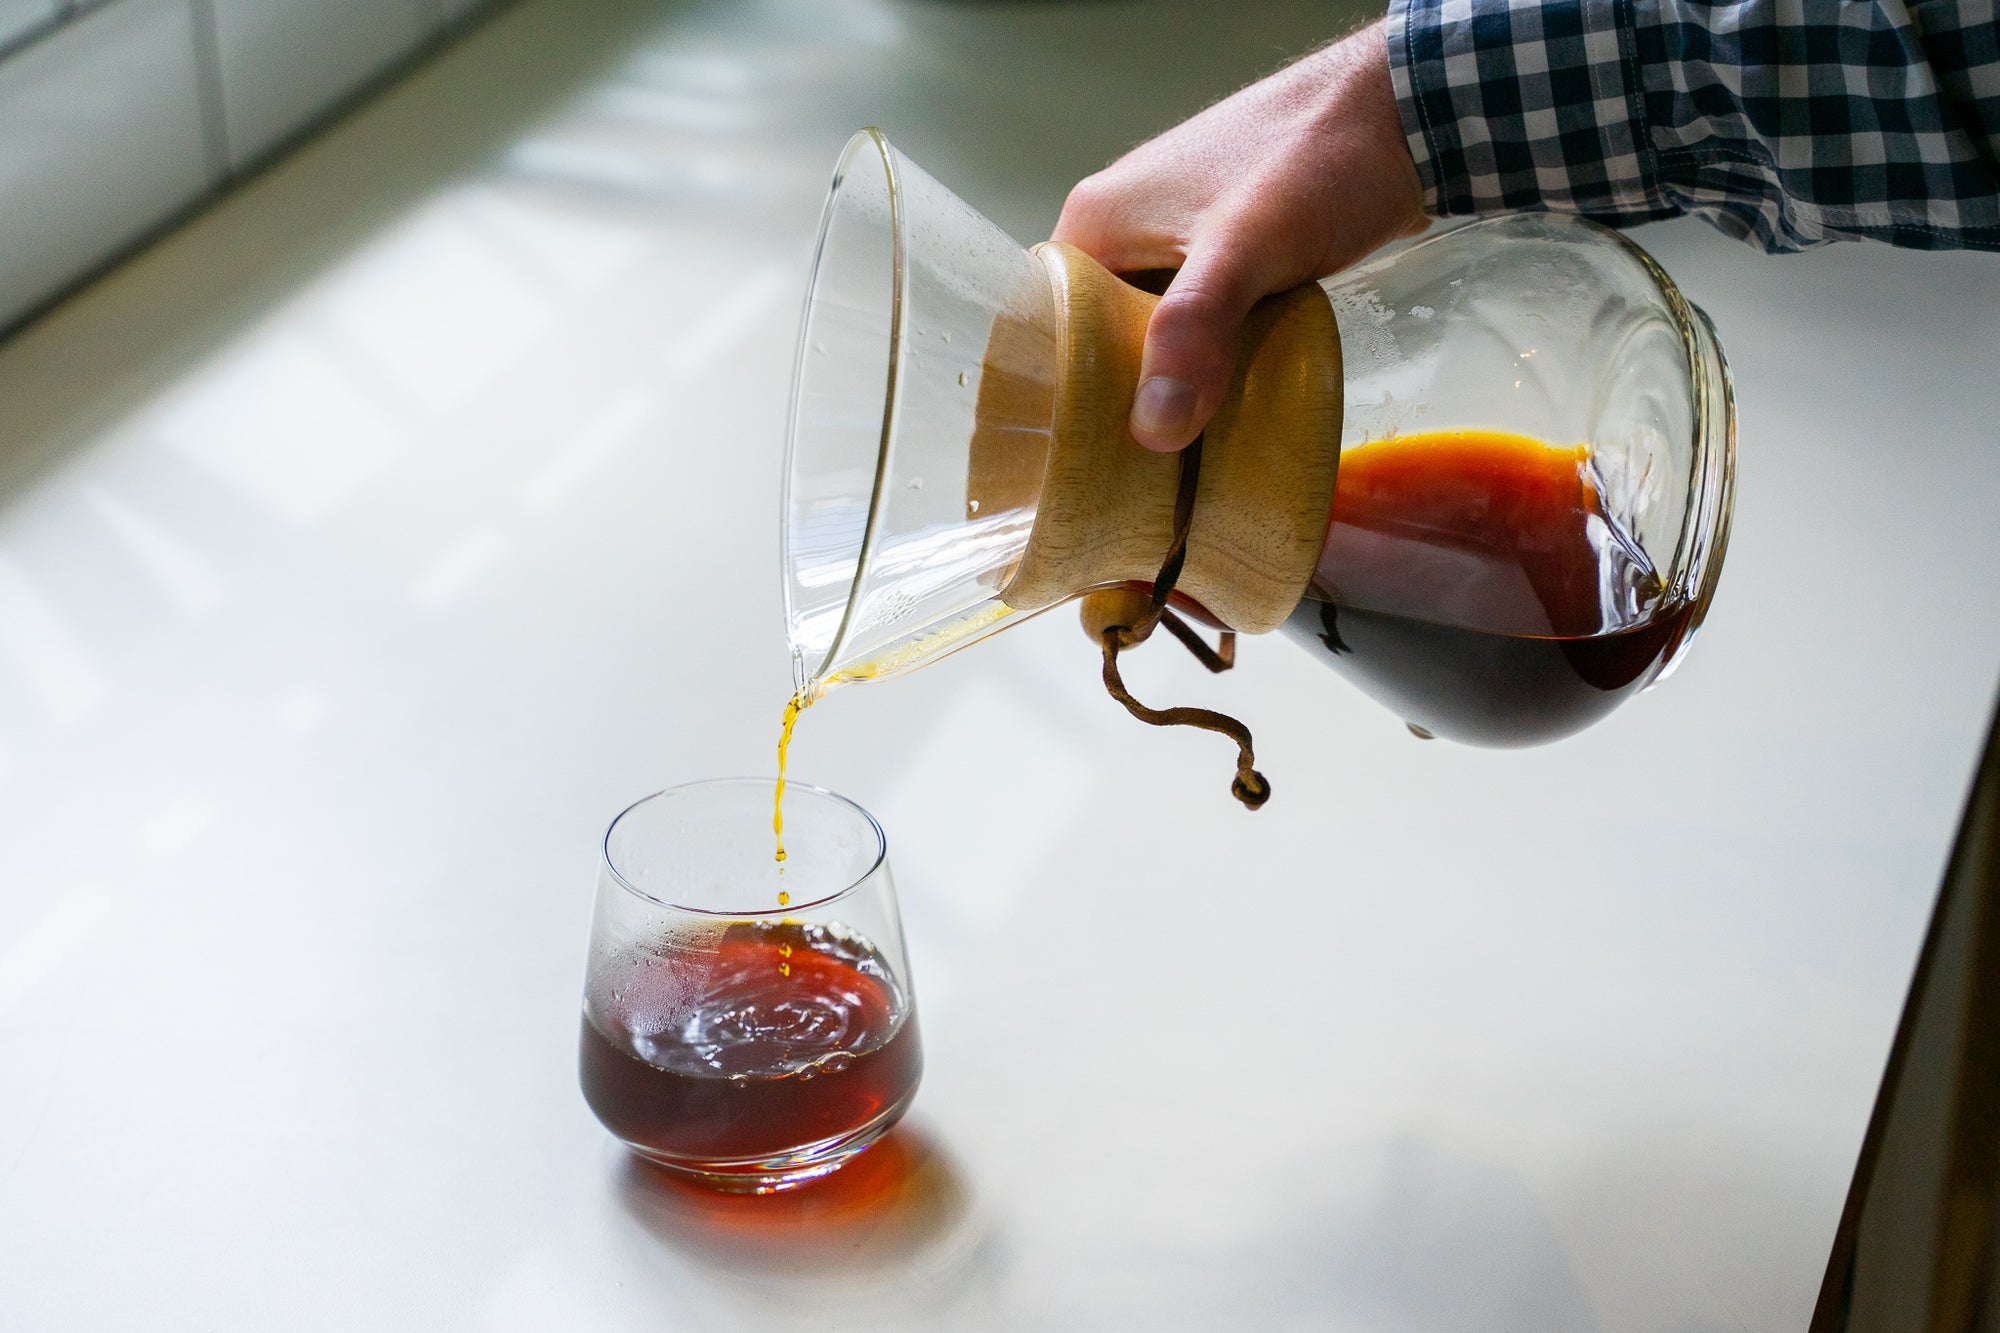 How to get the most out of your pourover coffee